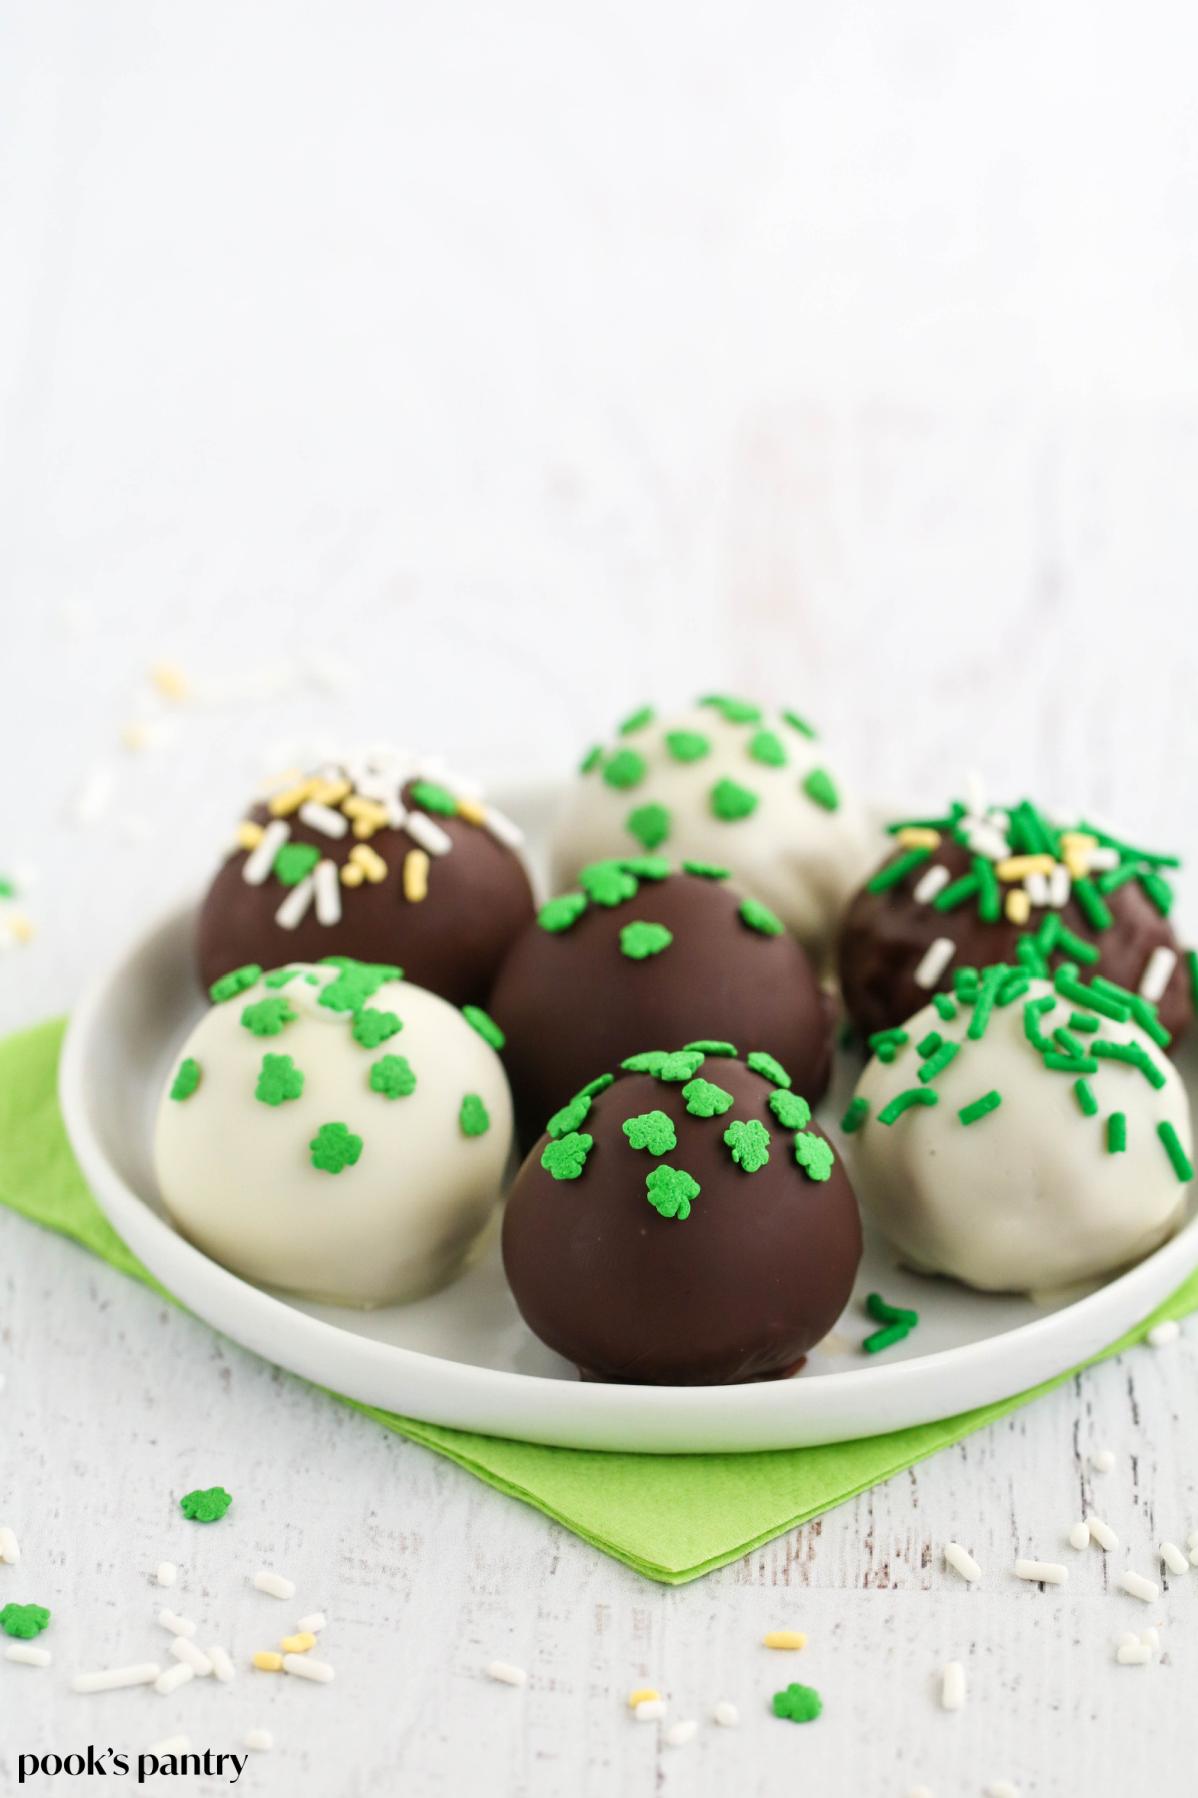  These Irish Cream Balls are the perfect treat for any St. Patrick's Day celebration!